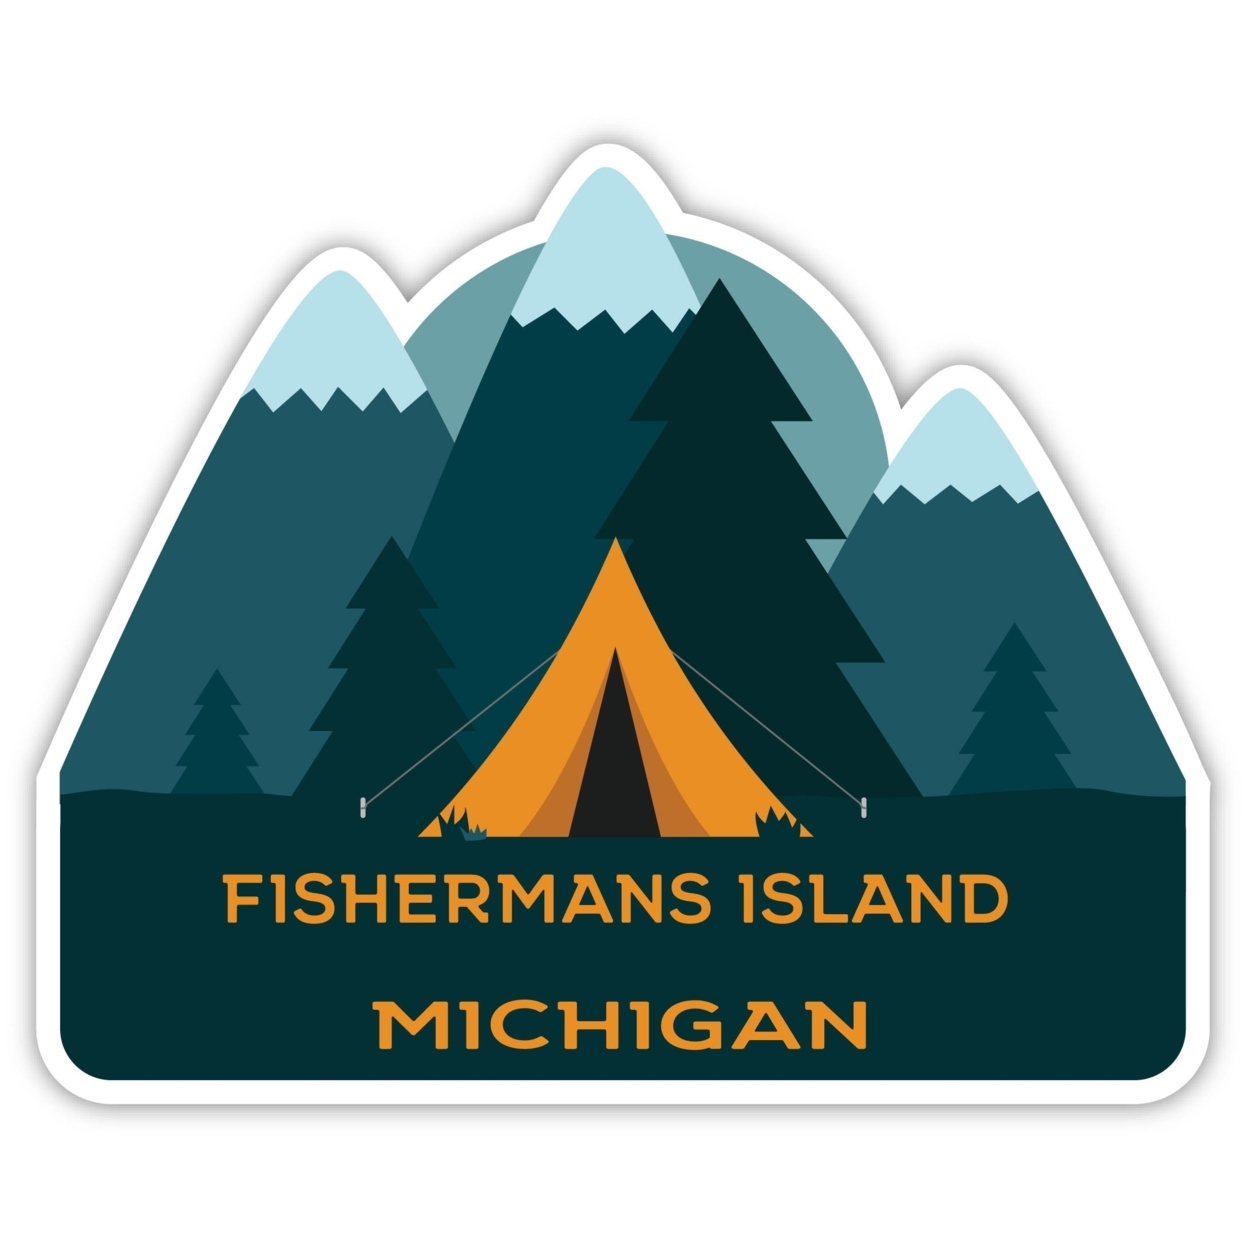 Fishermans Island Michigan Souvenir Decorative Stickers (Choose Theme And Size) - 4-Pack, 10-Inch, Tent